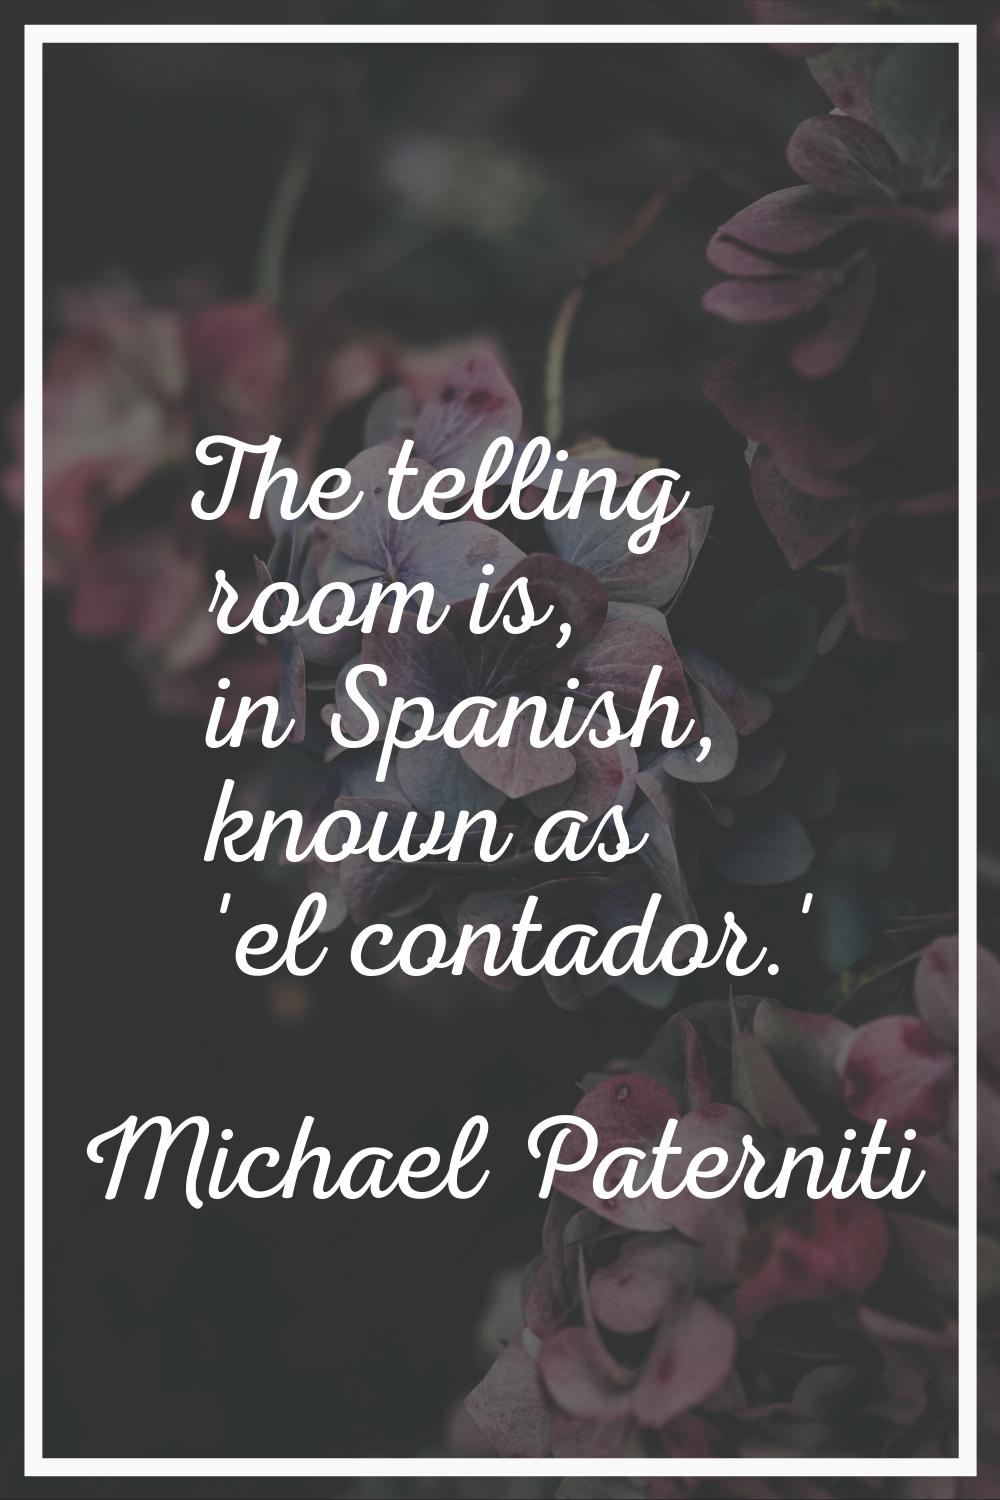 The telling room is, in Spanish, known as 'el contador.'